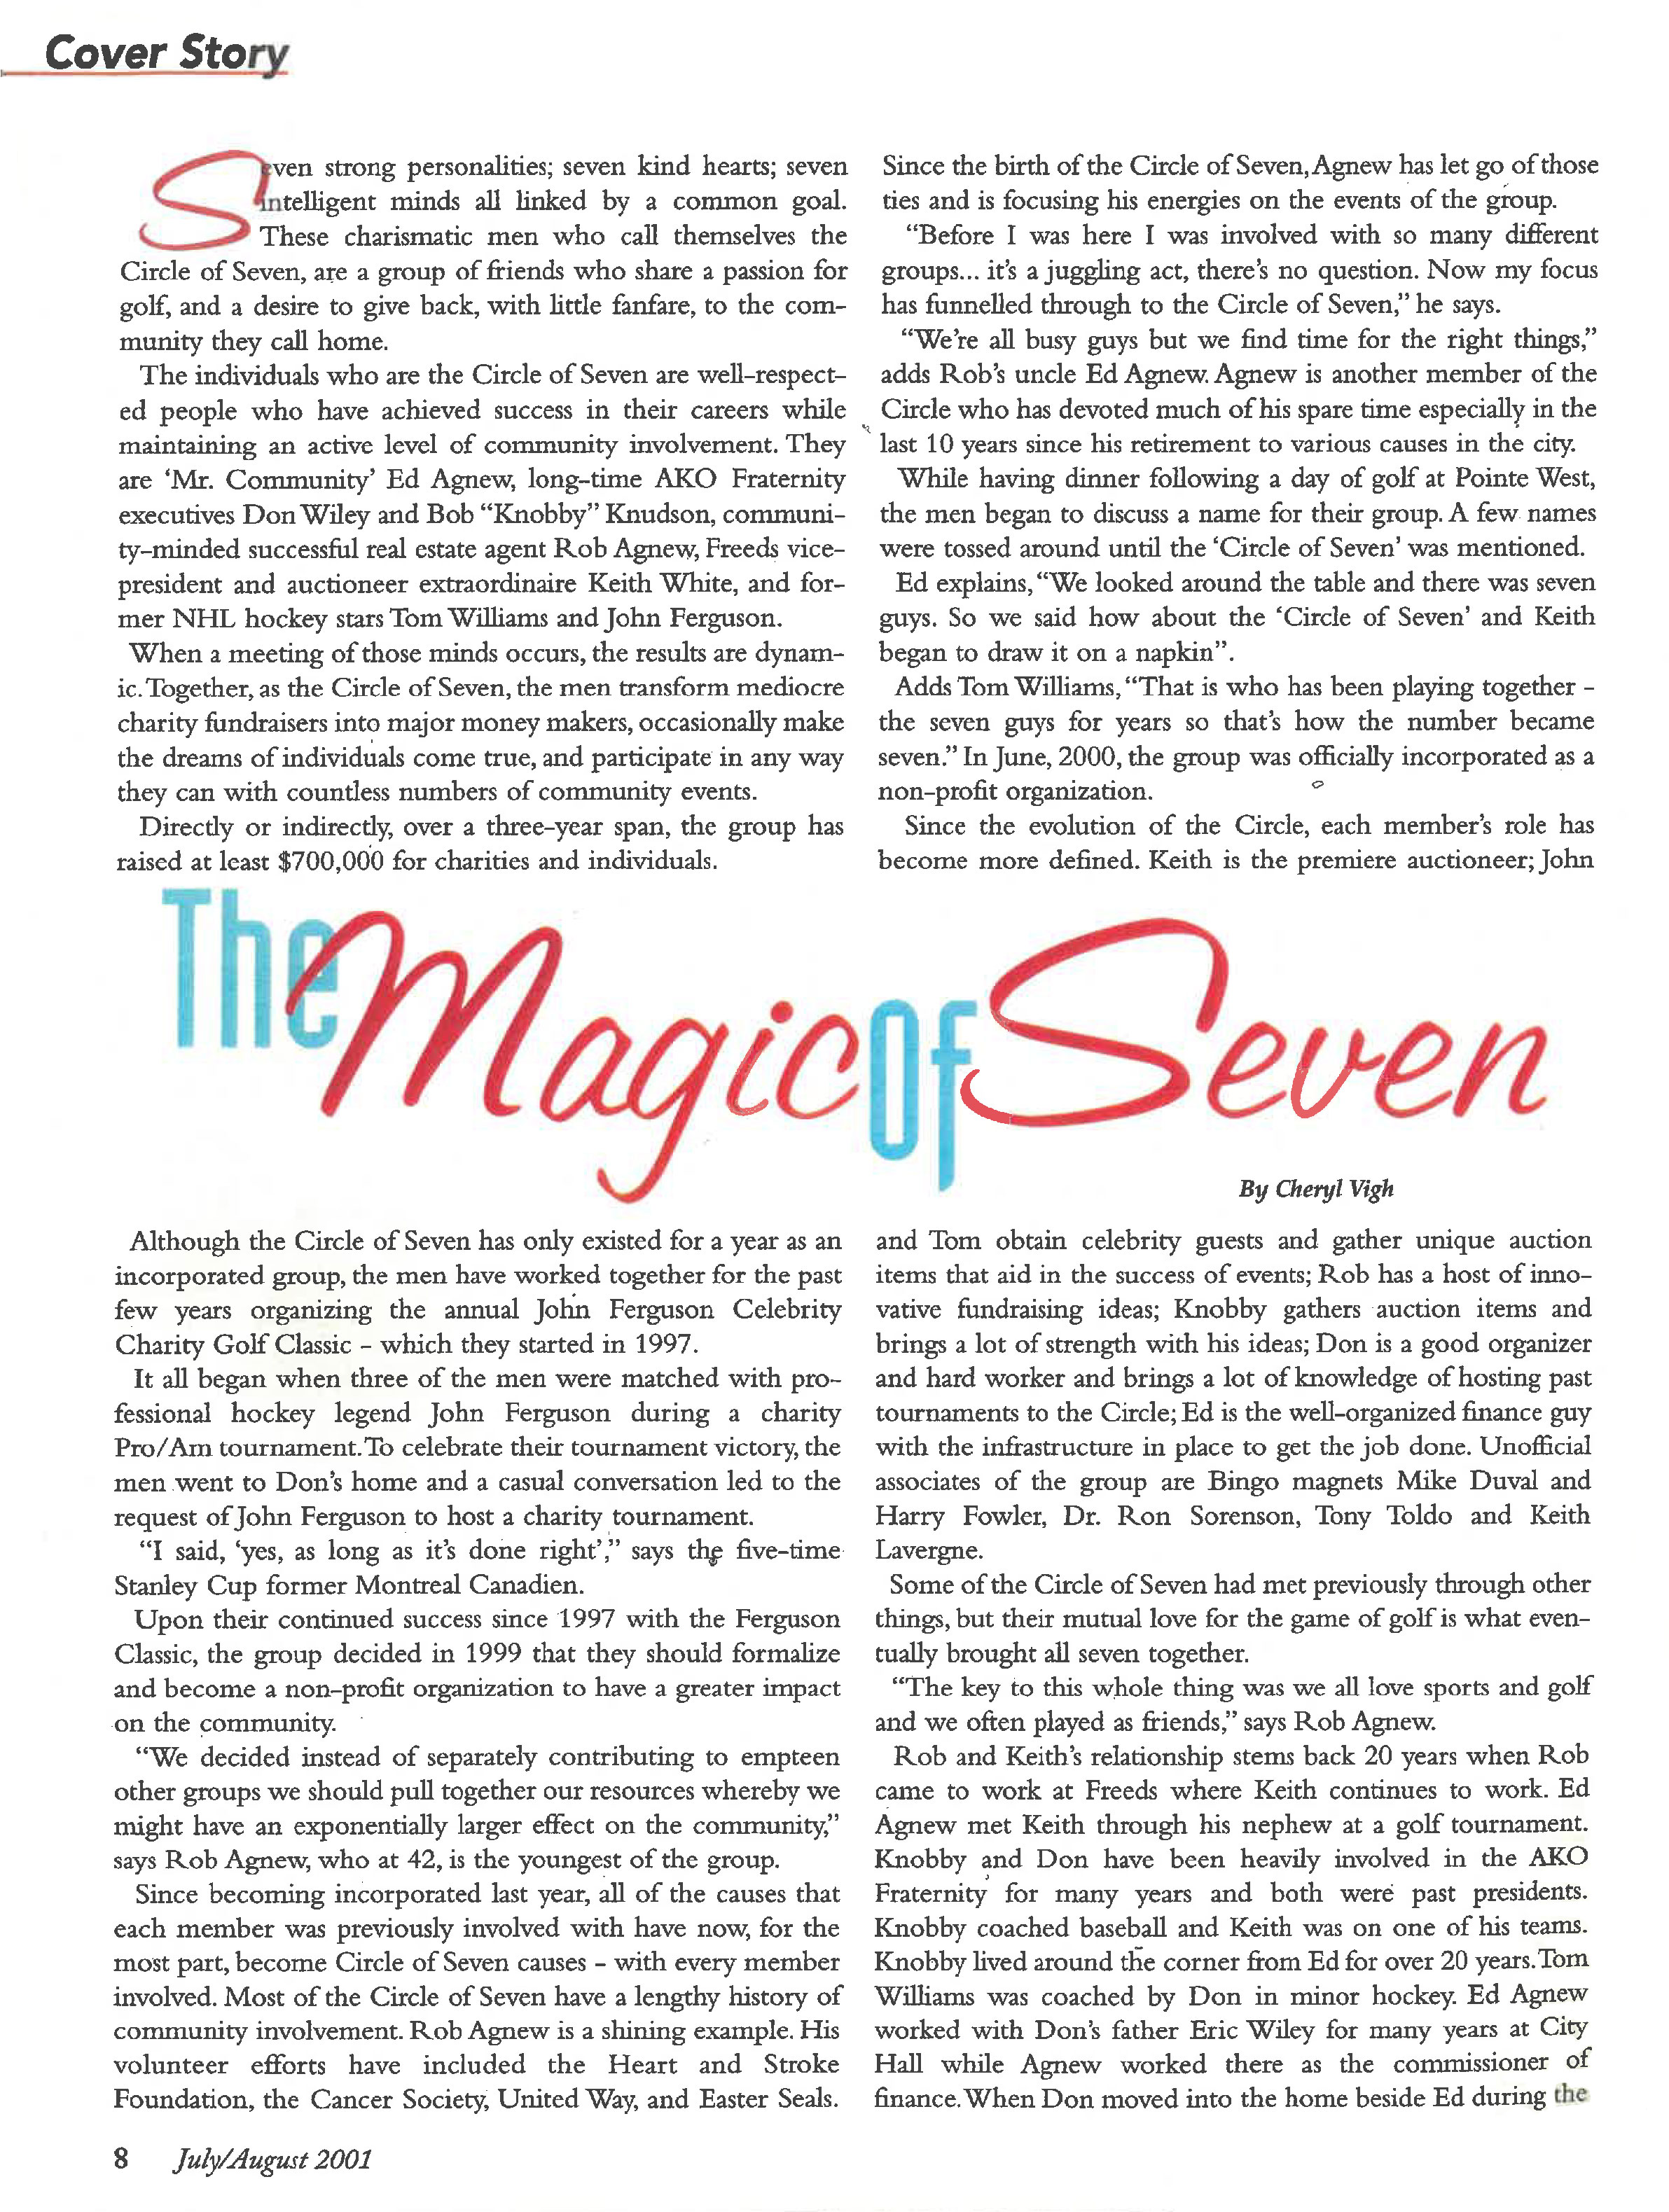 The magic of Seven article Into